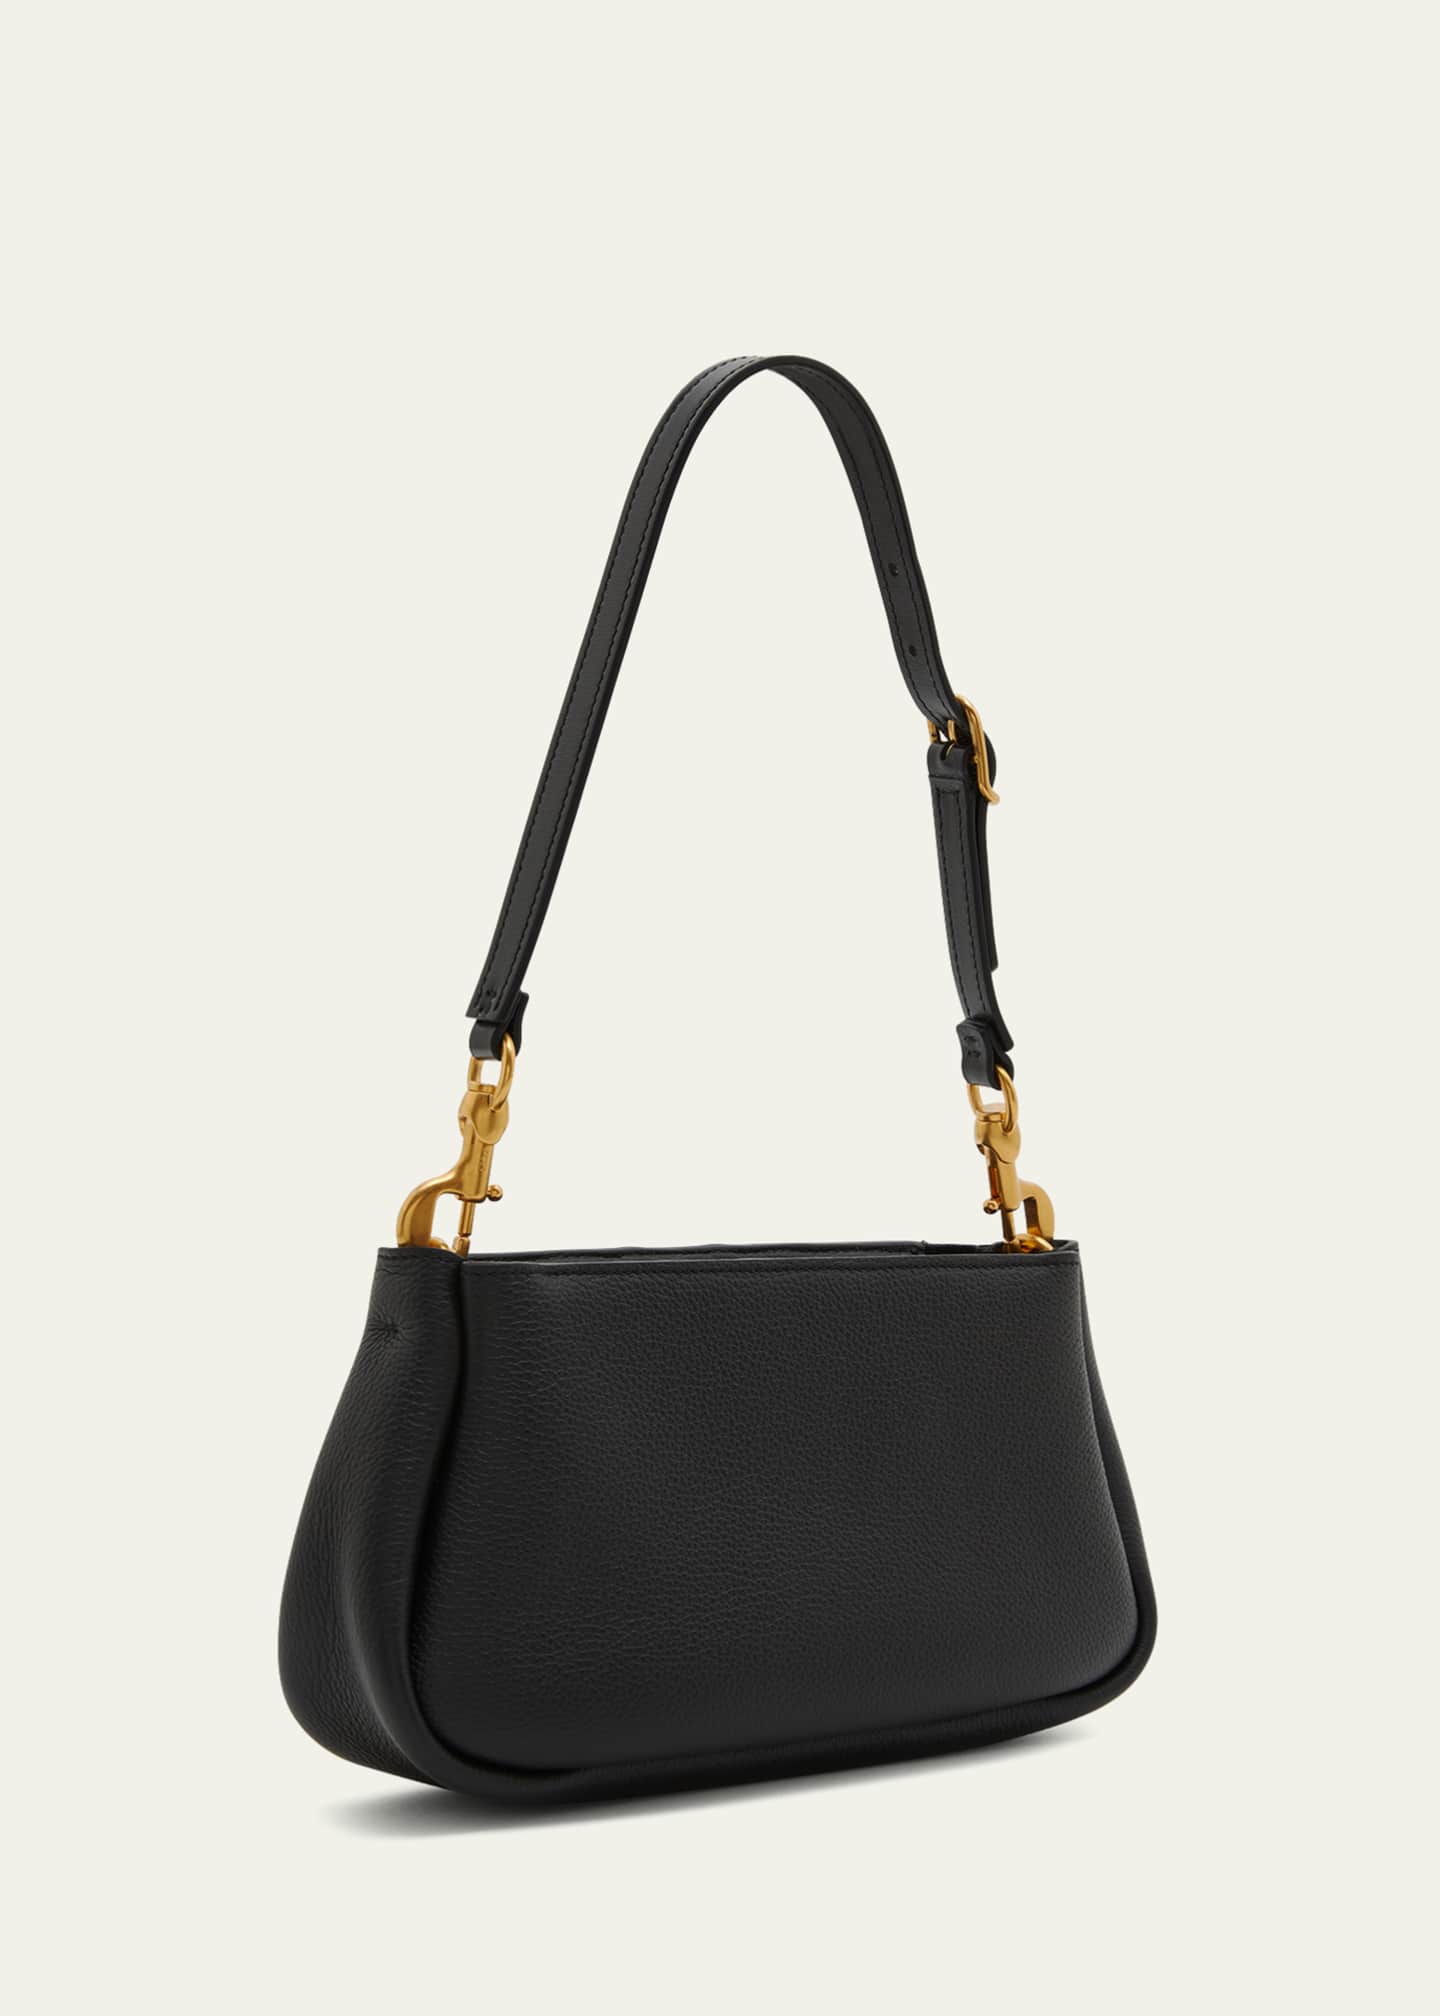 Chloe Marcie Small Calf Leather Clutch Bag with Shoulder Strap